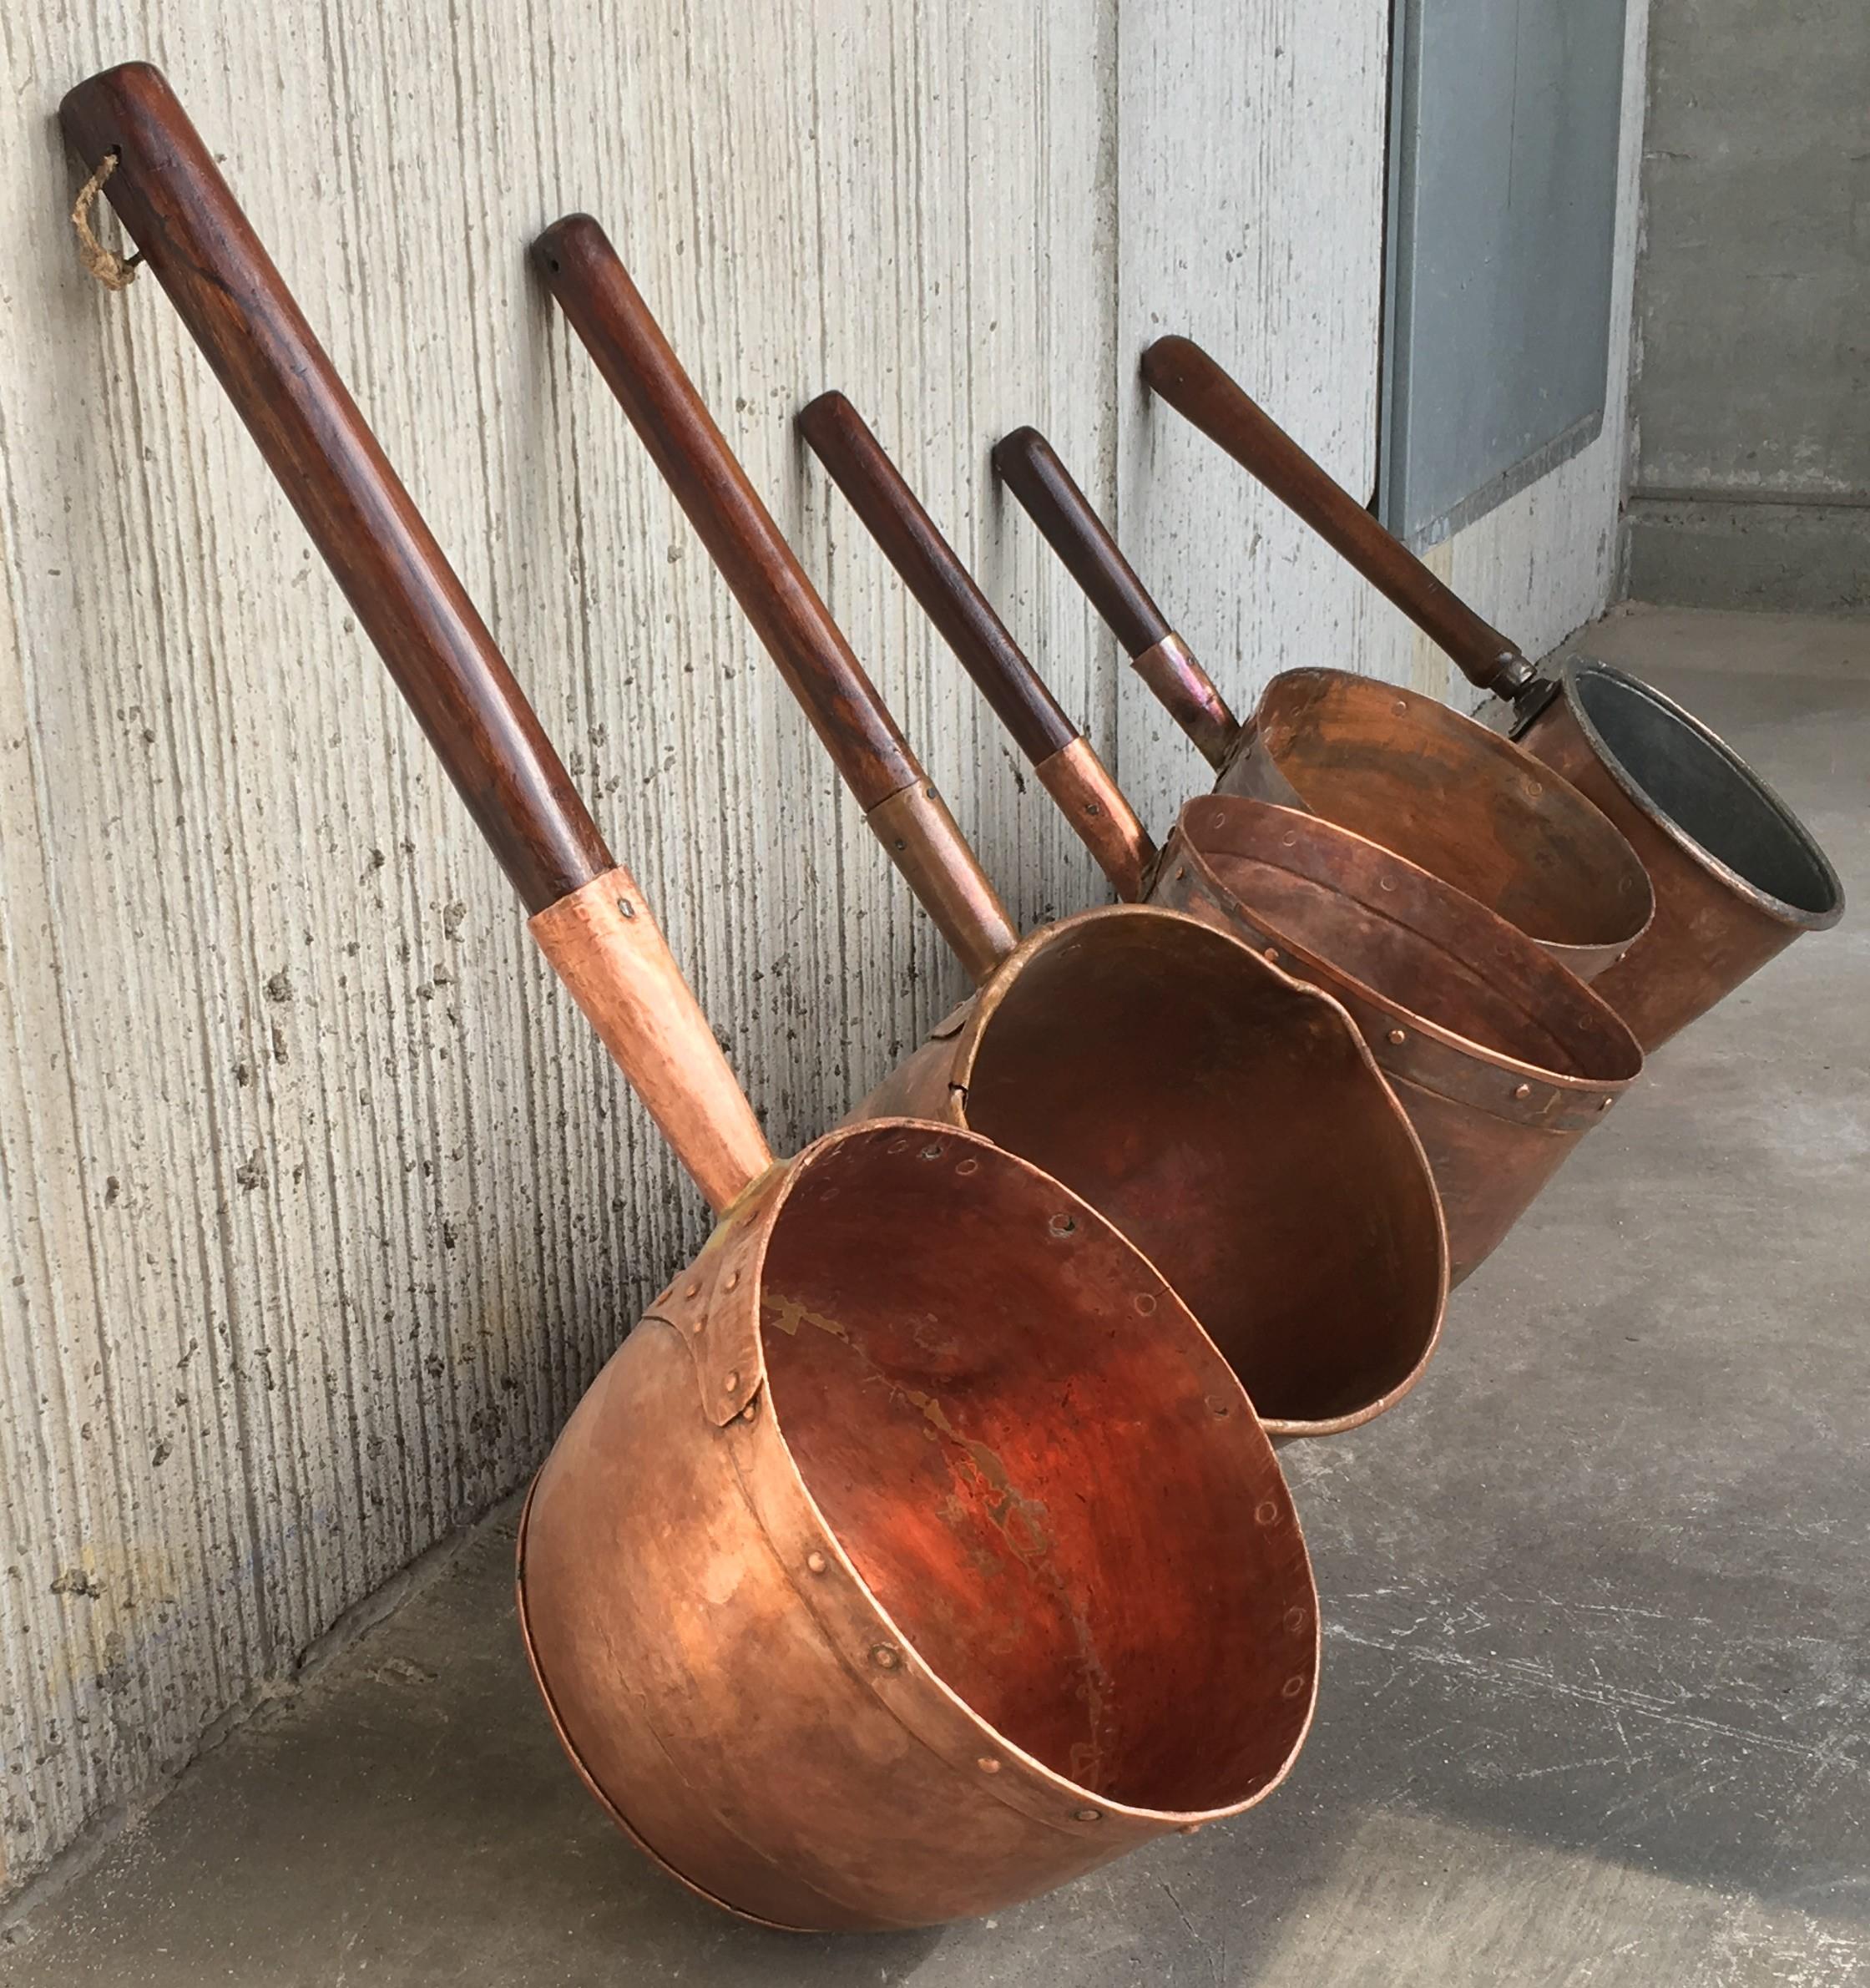 Great collection of antique Spanish handmade and forged copper cook pans - pots from the 1800s. The perfect accessory for your Country Colonial Kitchen. The antique Spanish copper pans were handmade and please not the flat spot in the larger